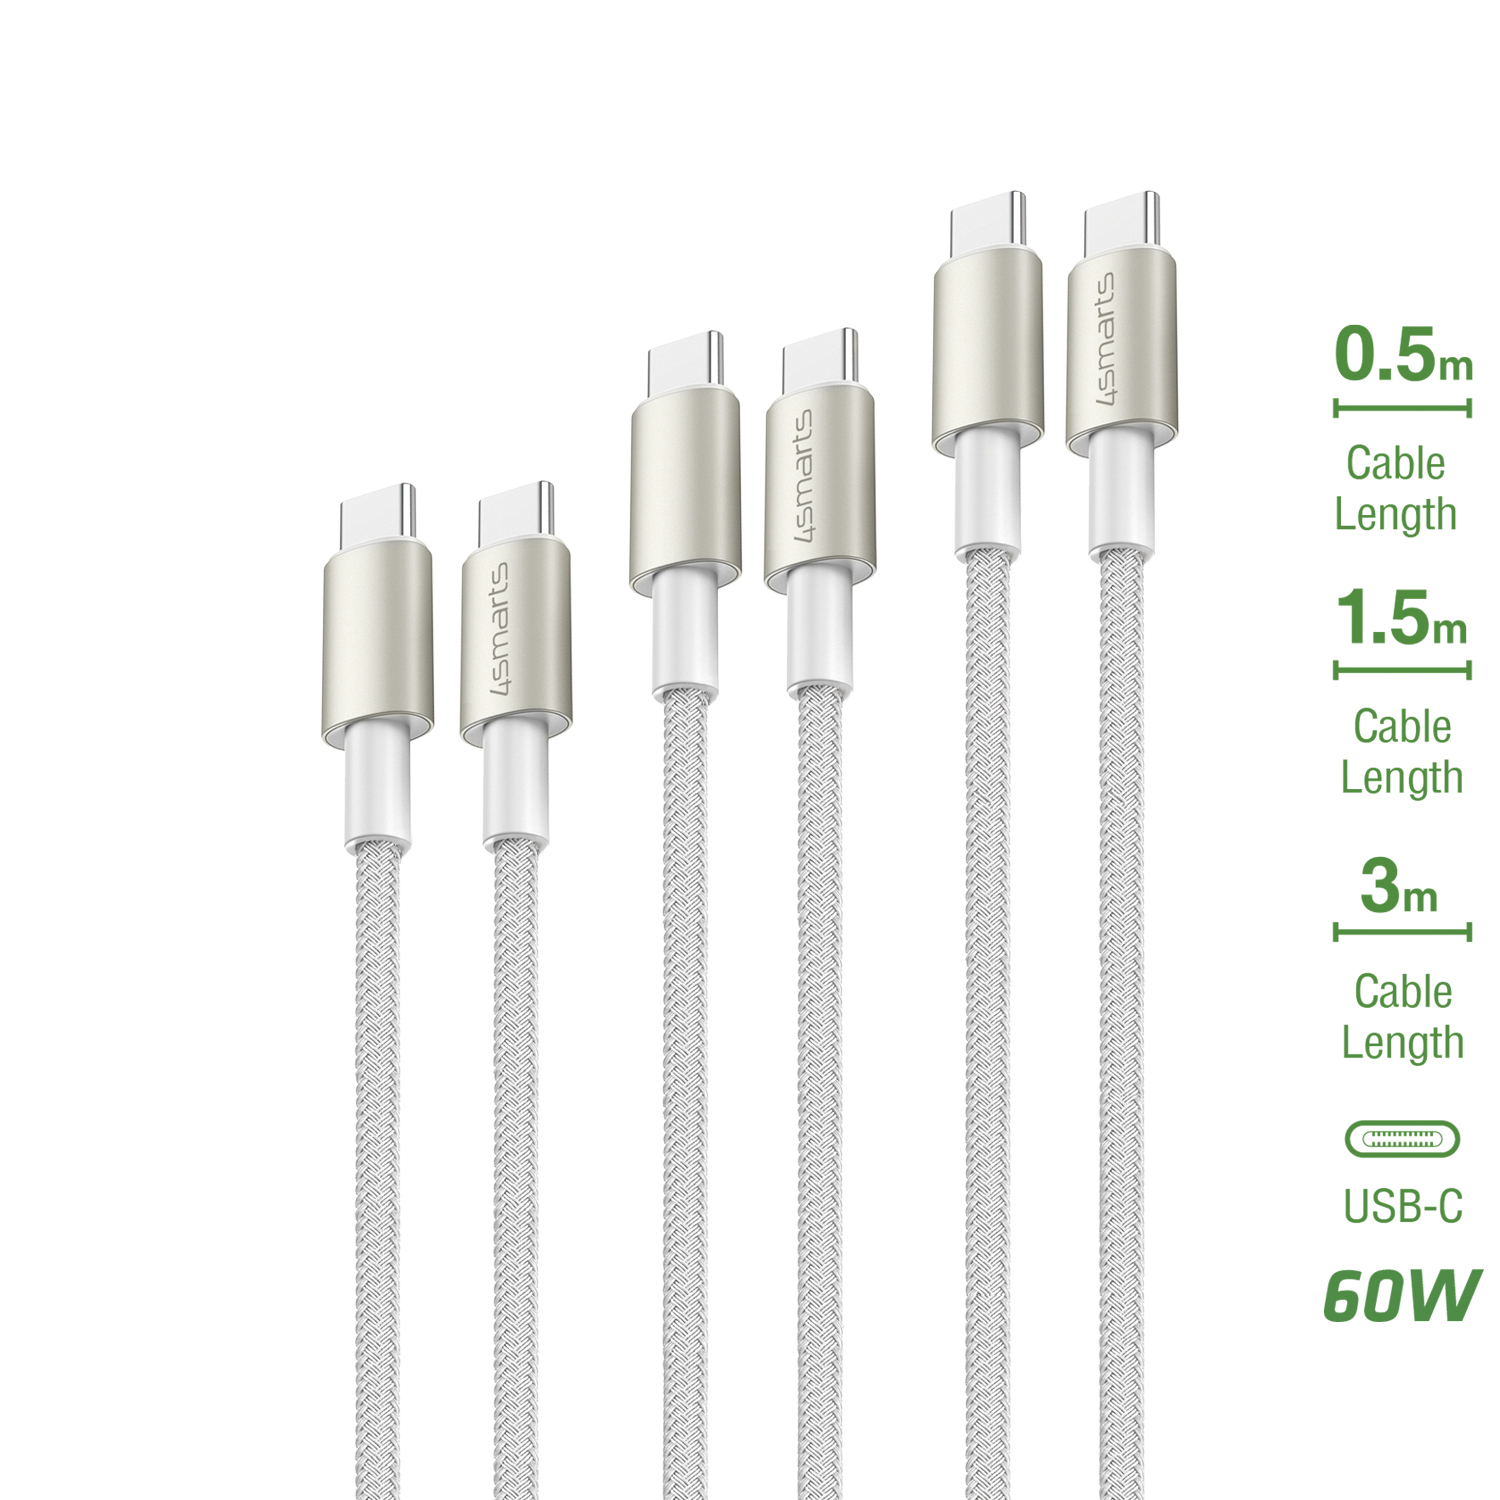 The different lengths of the 4smart USB-C to USB-C Cable PremiumCord 60W of 0.5m, 1.5m and 3m ensure that the right cable is always at hand.